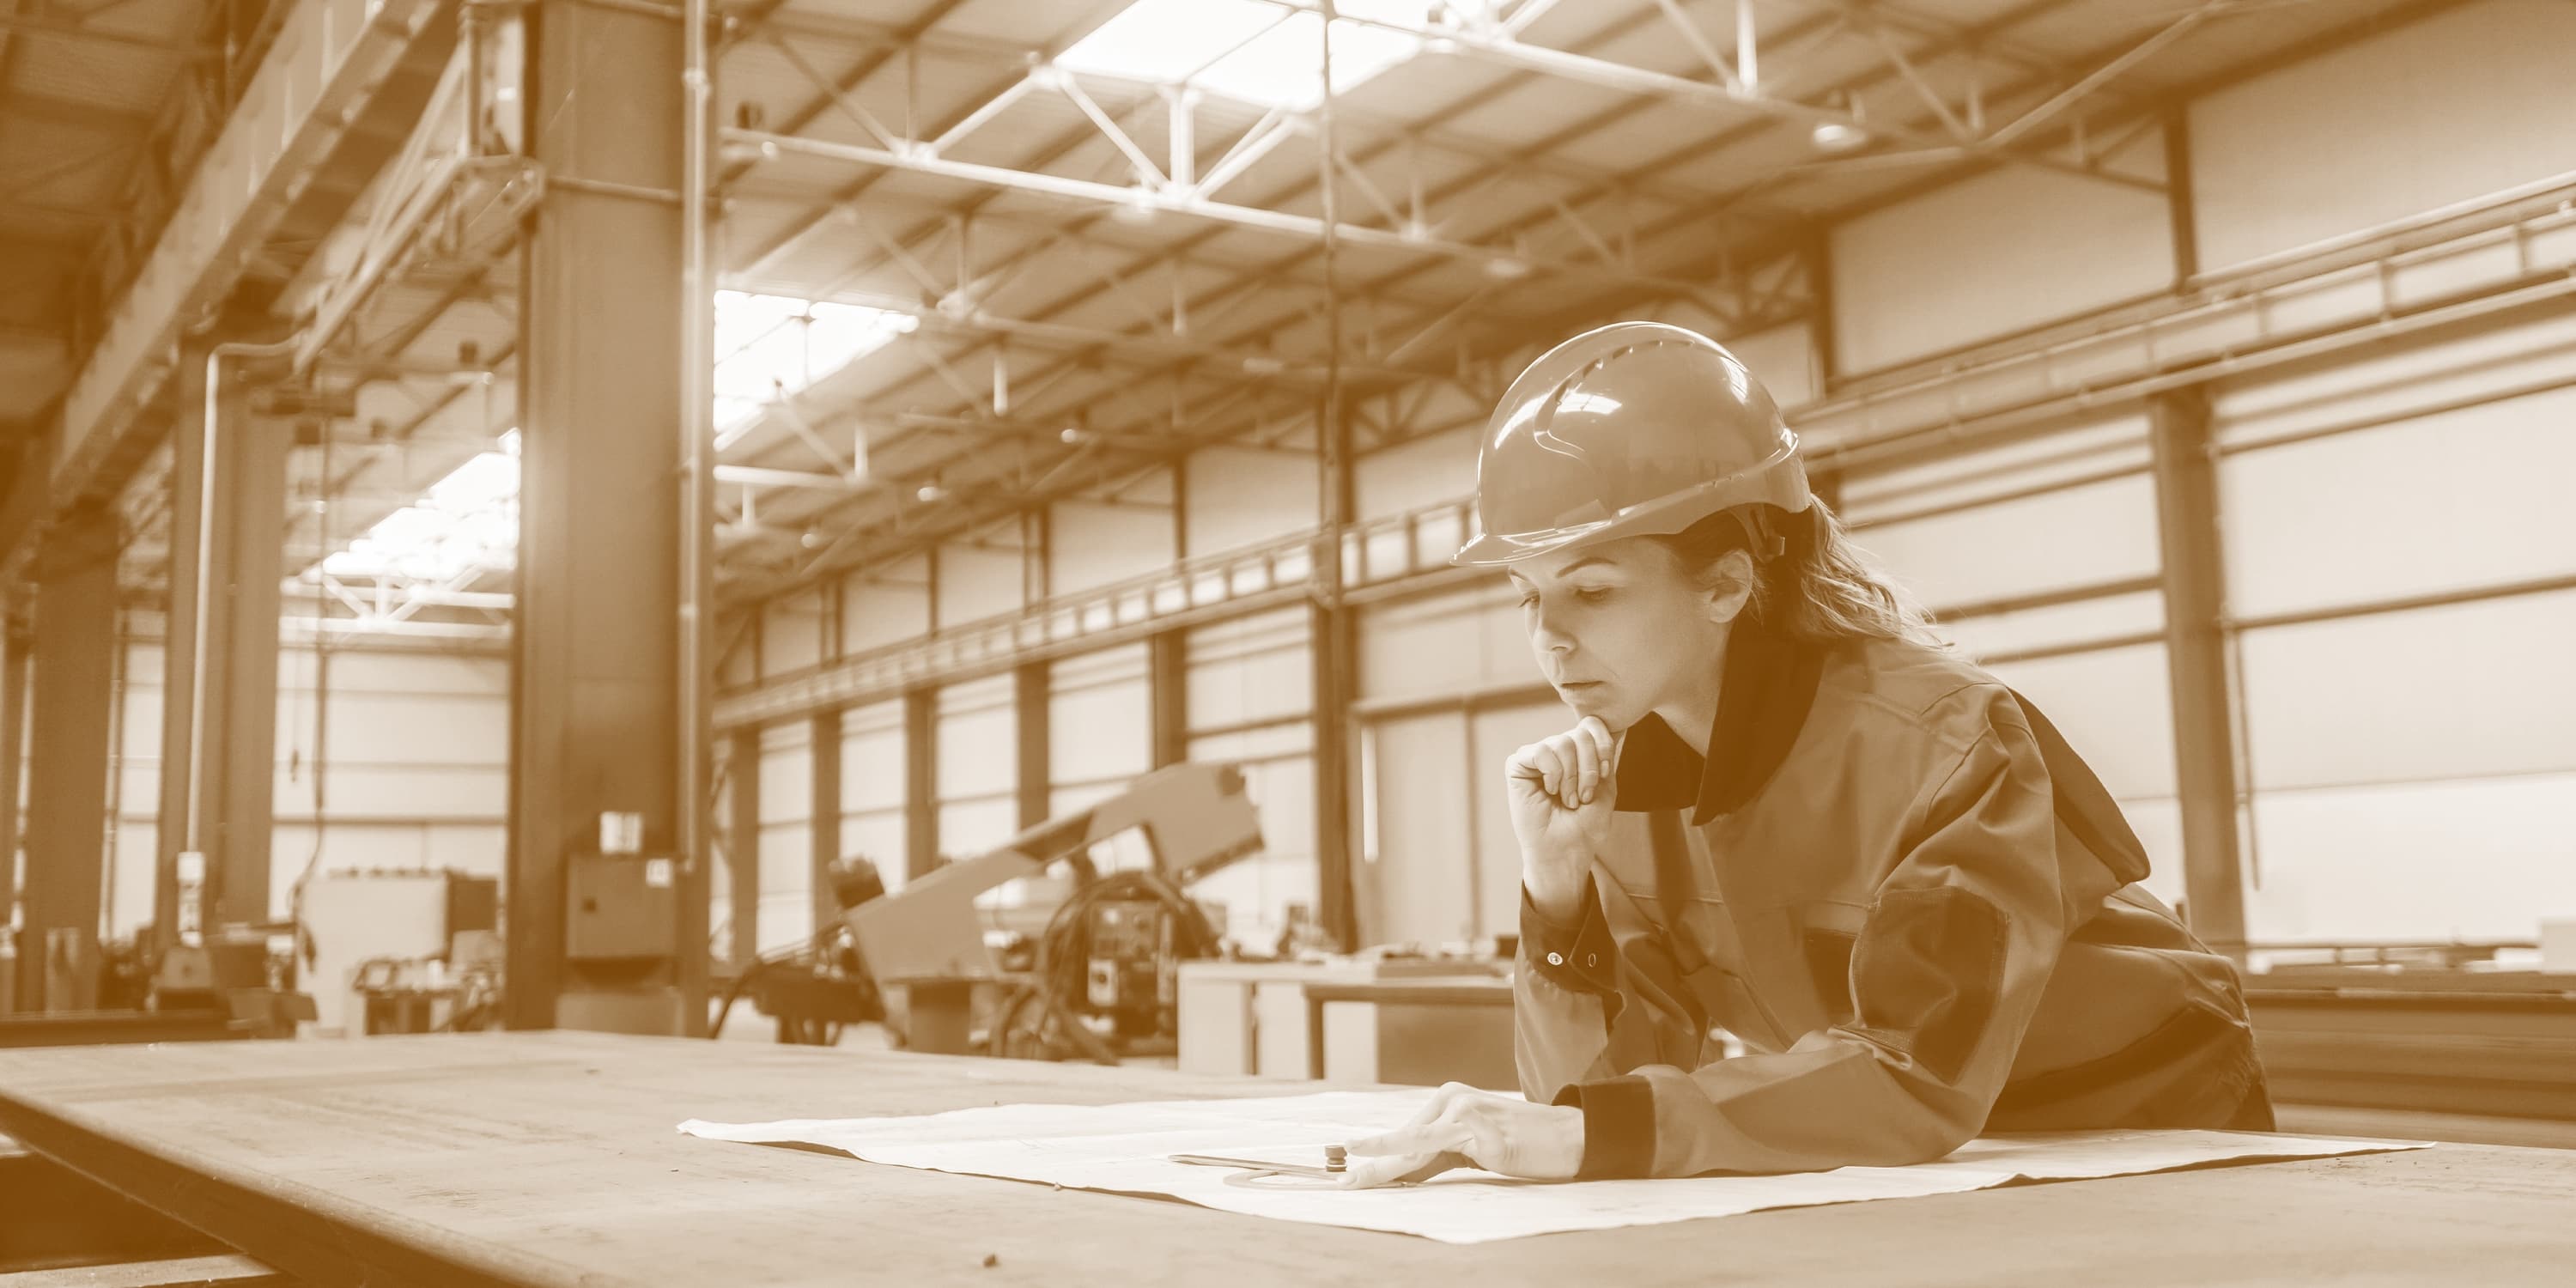 Women currently make up around 10% of the construction workforce in the USA